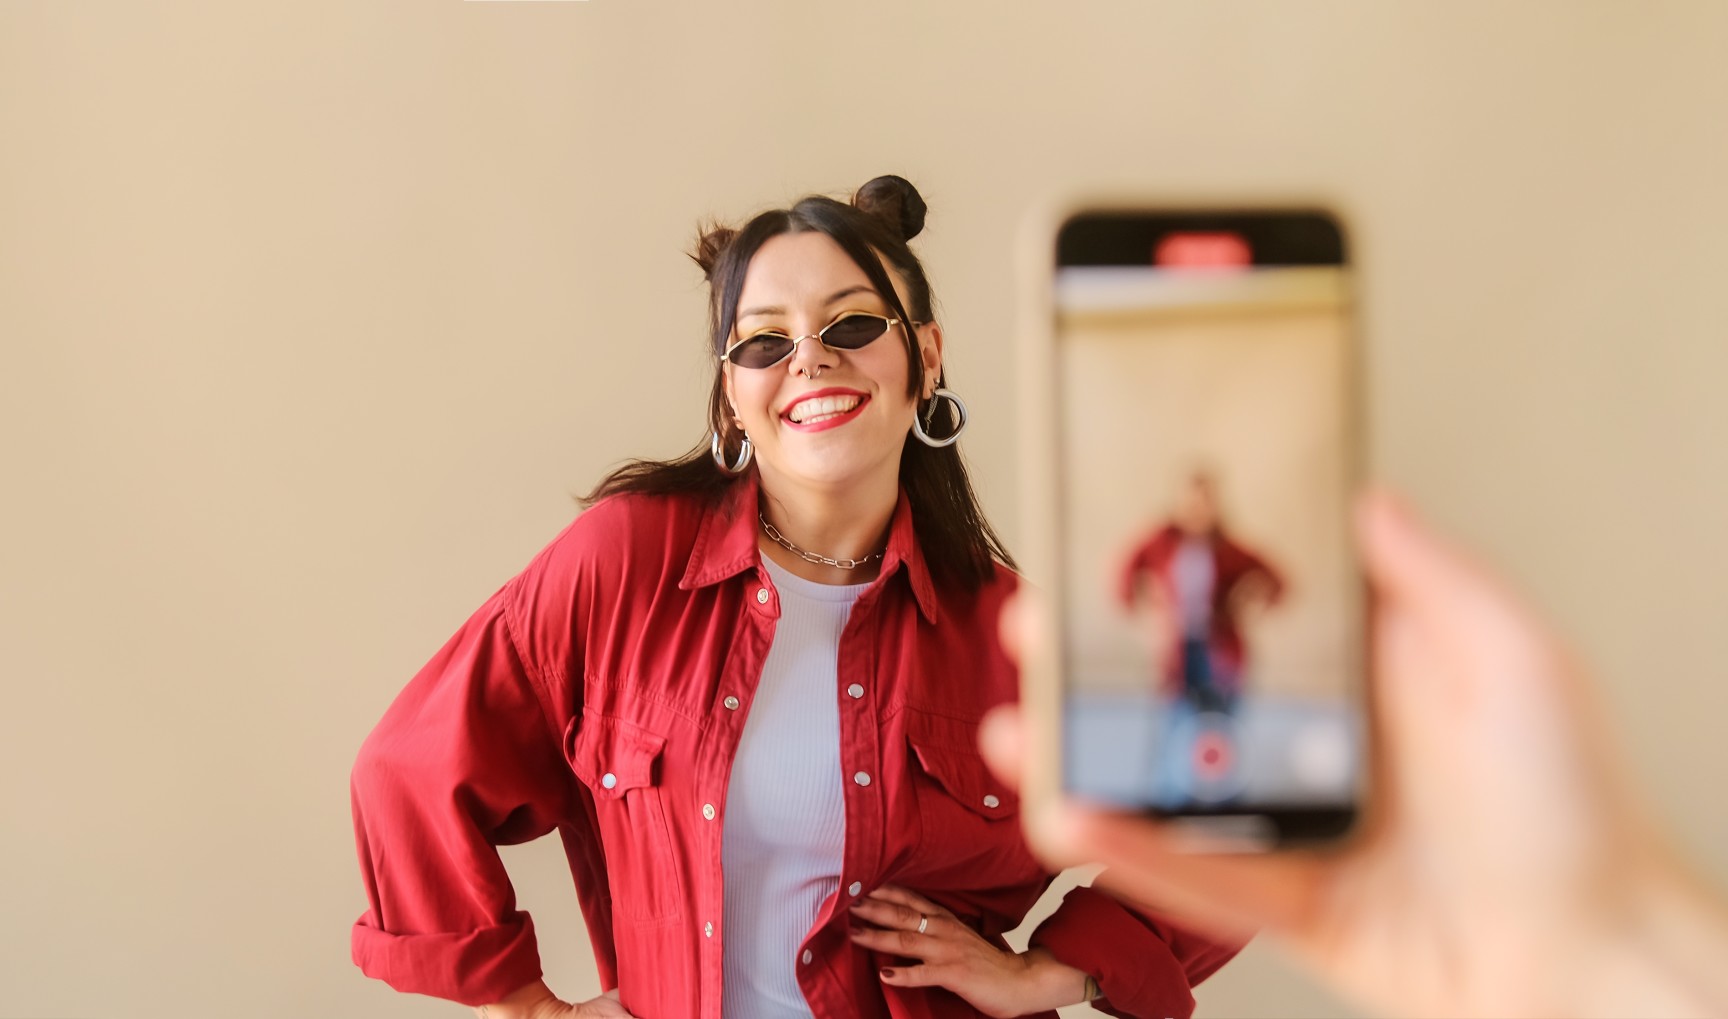 Phone recording a woman wearing a red jacket while smiling